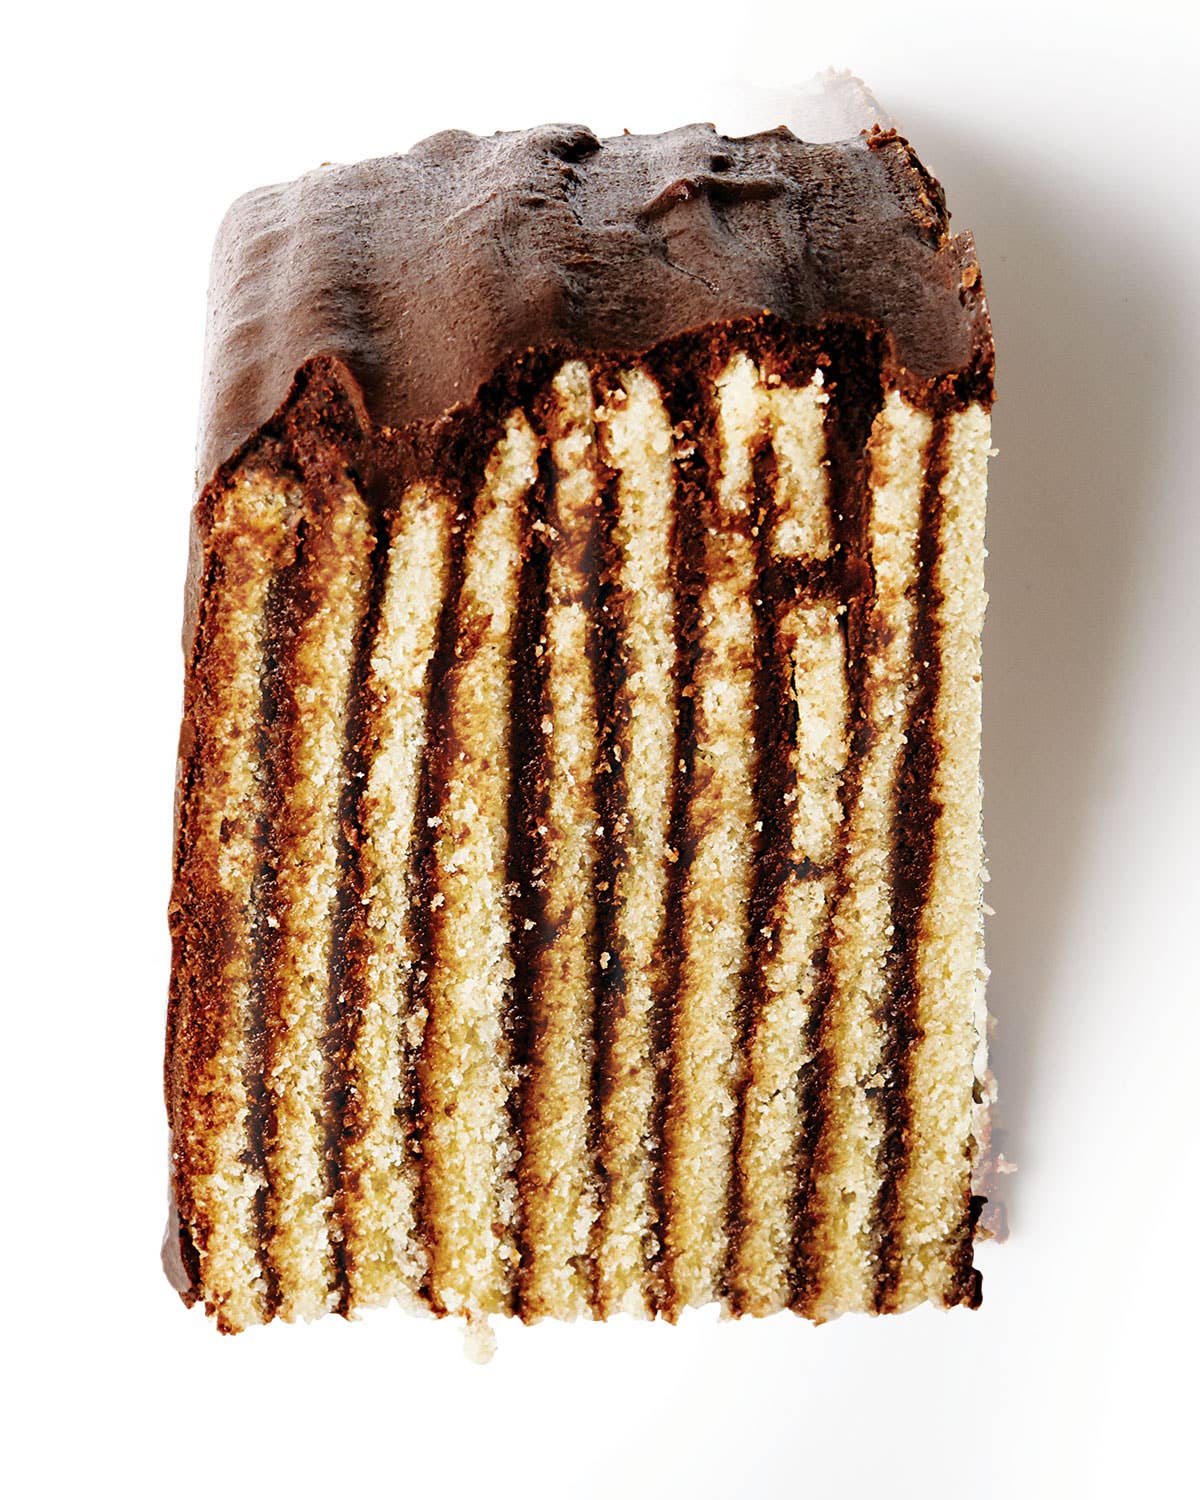 How to Make Perfect Layer Cakes